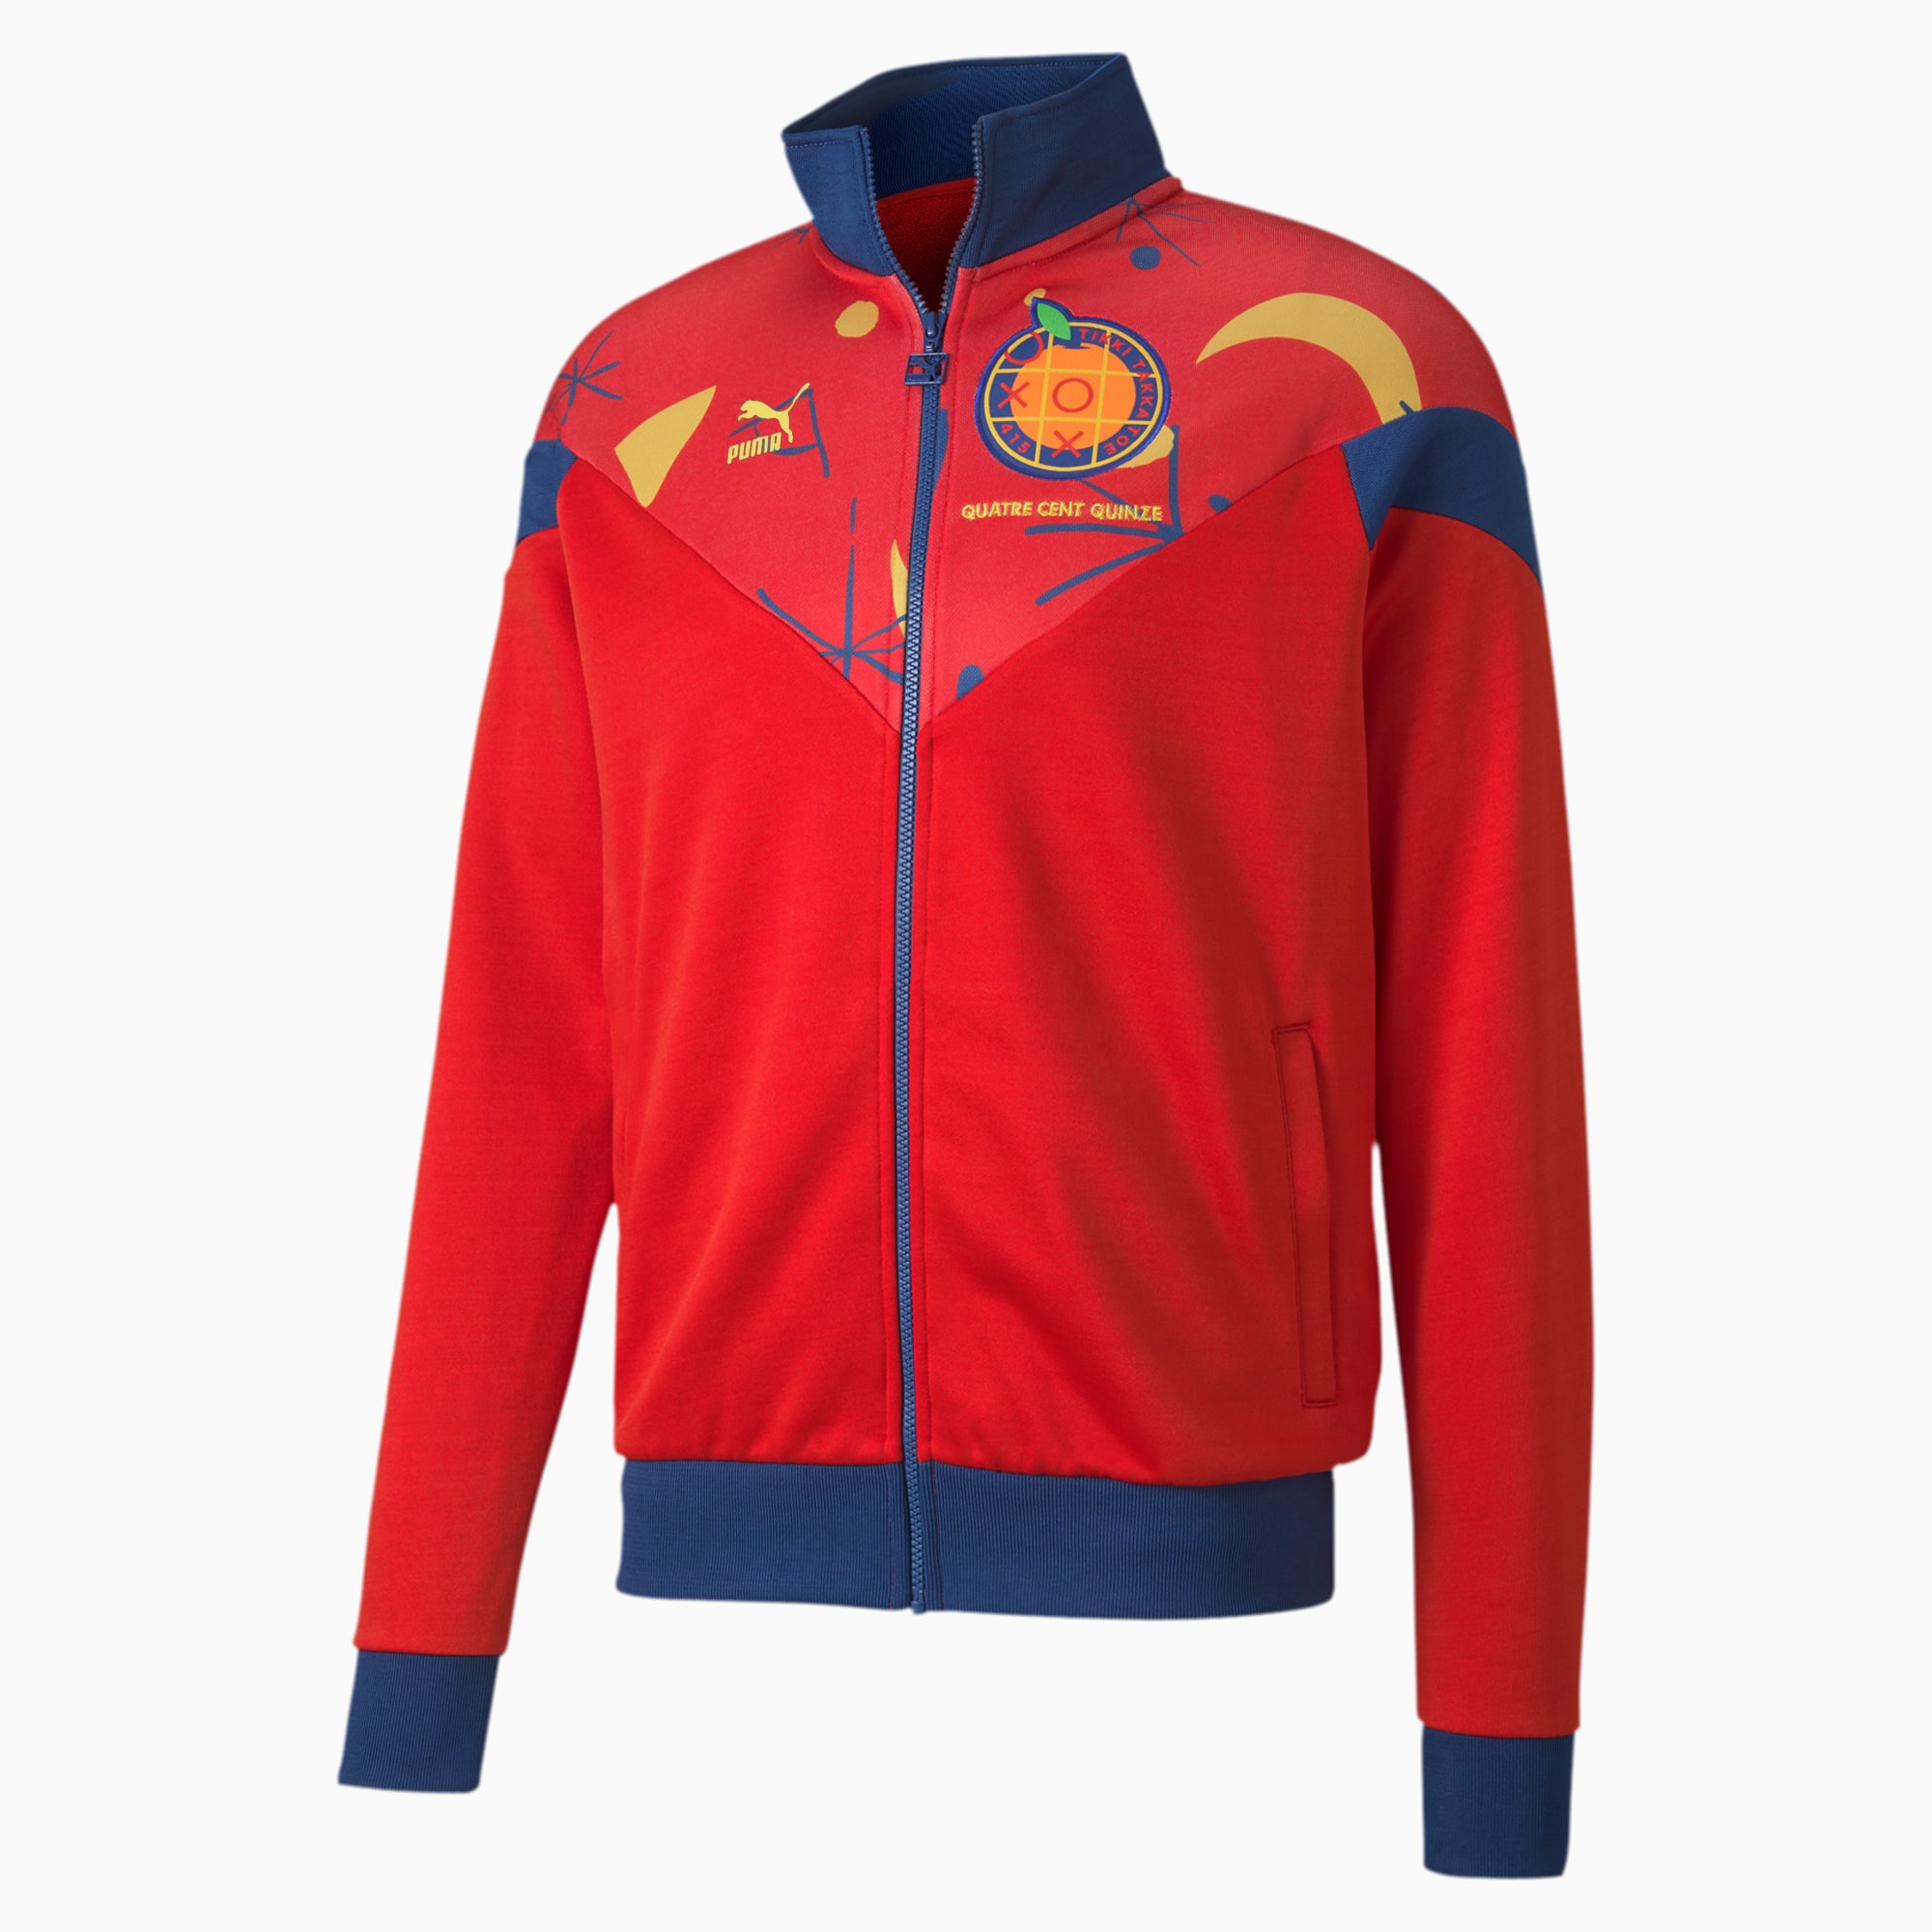 Spain-training jacket for Men, Blue/Red, Size S | PUMA - | StyleSearch